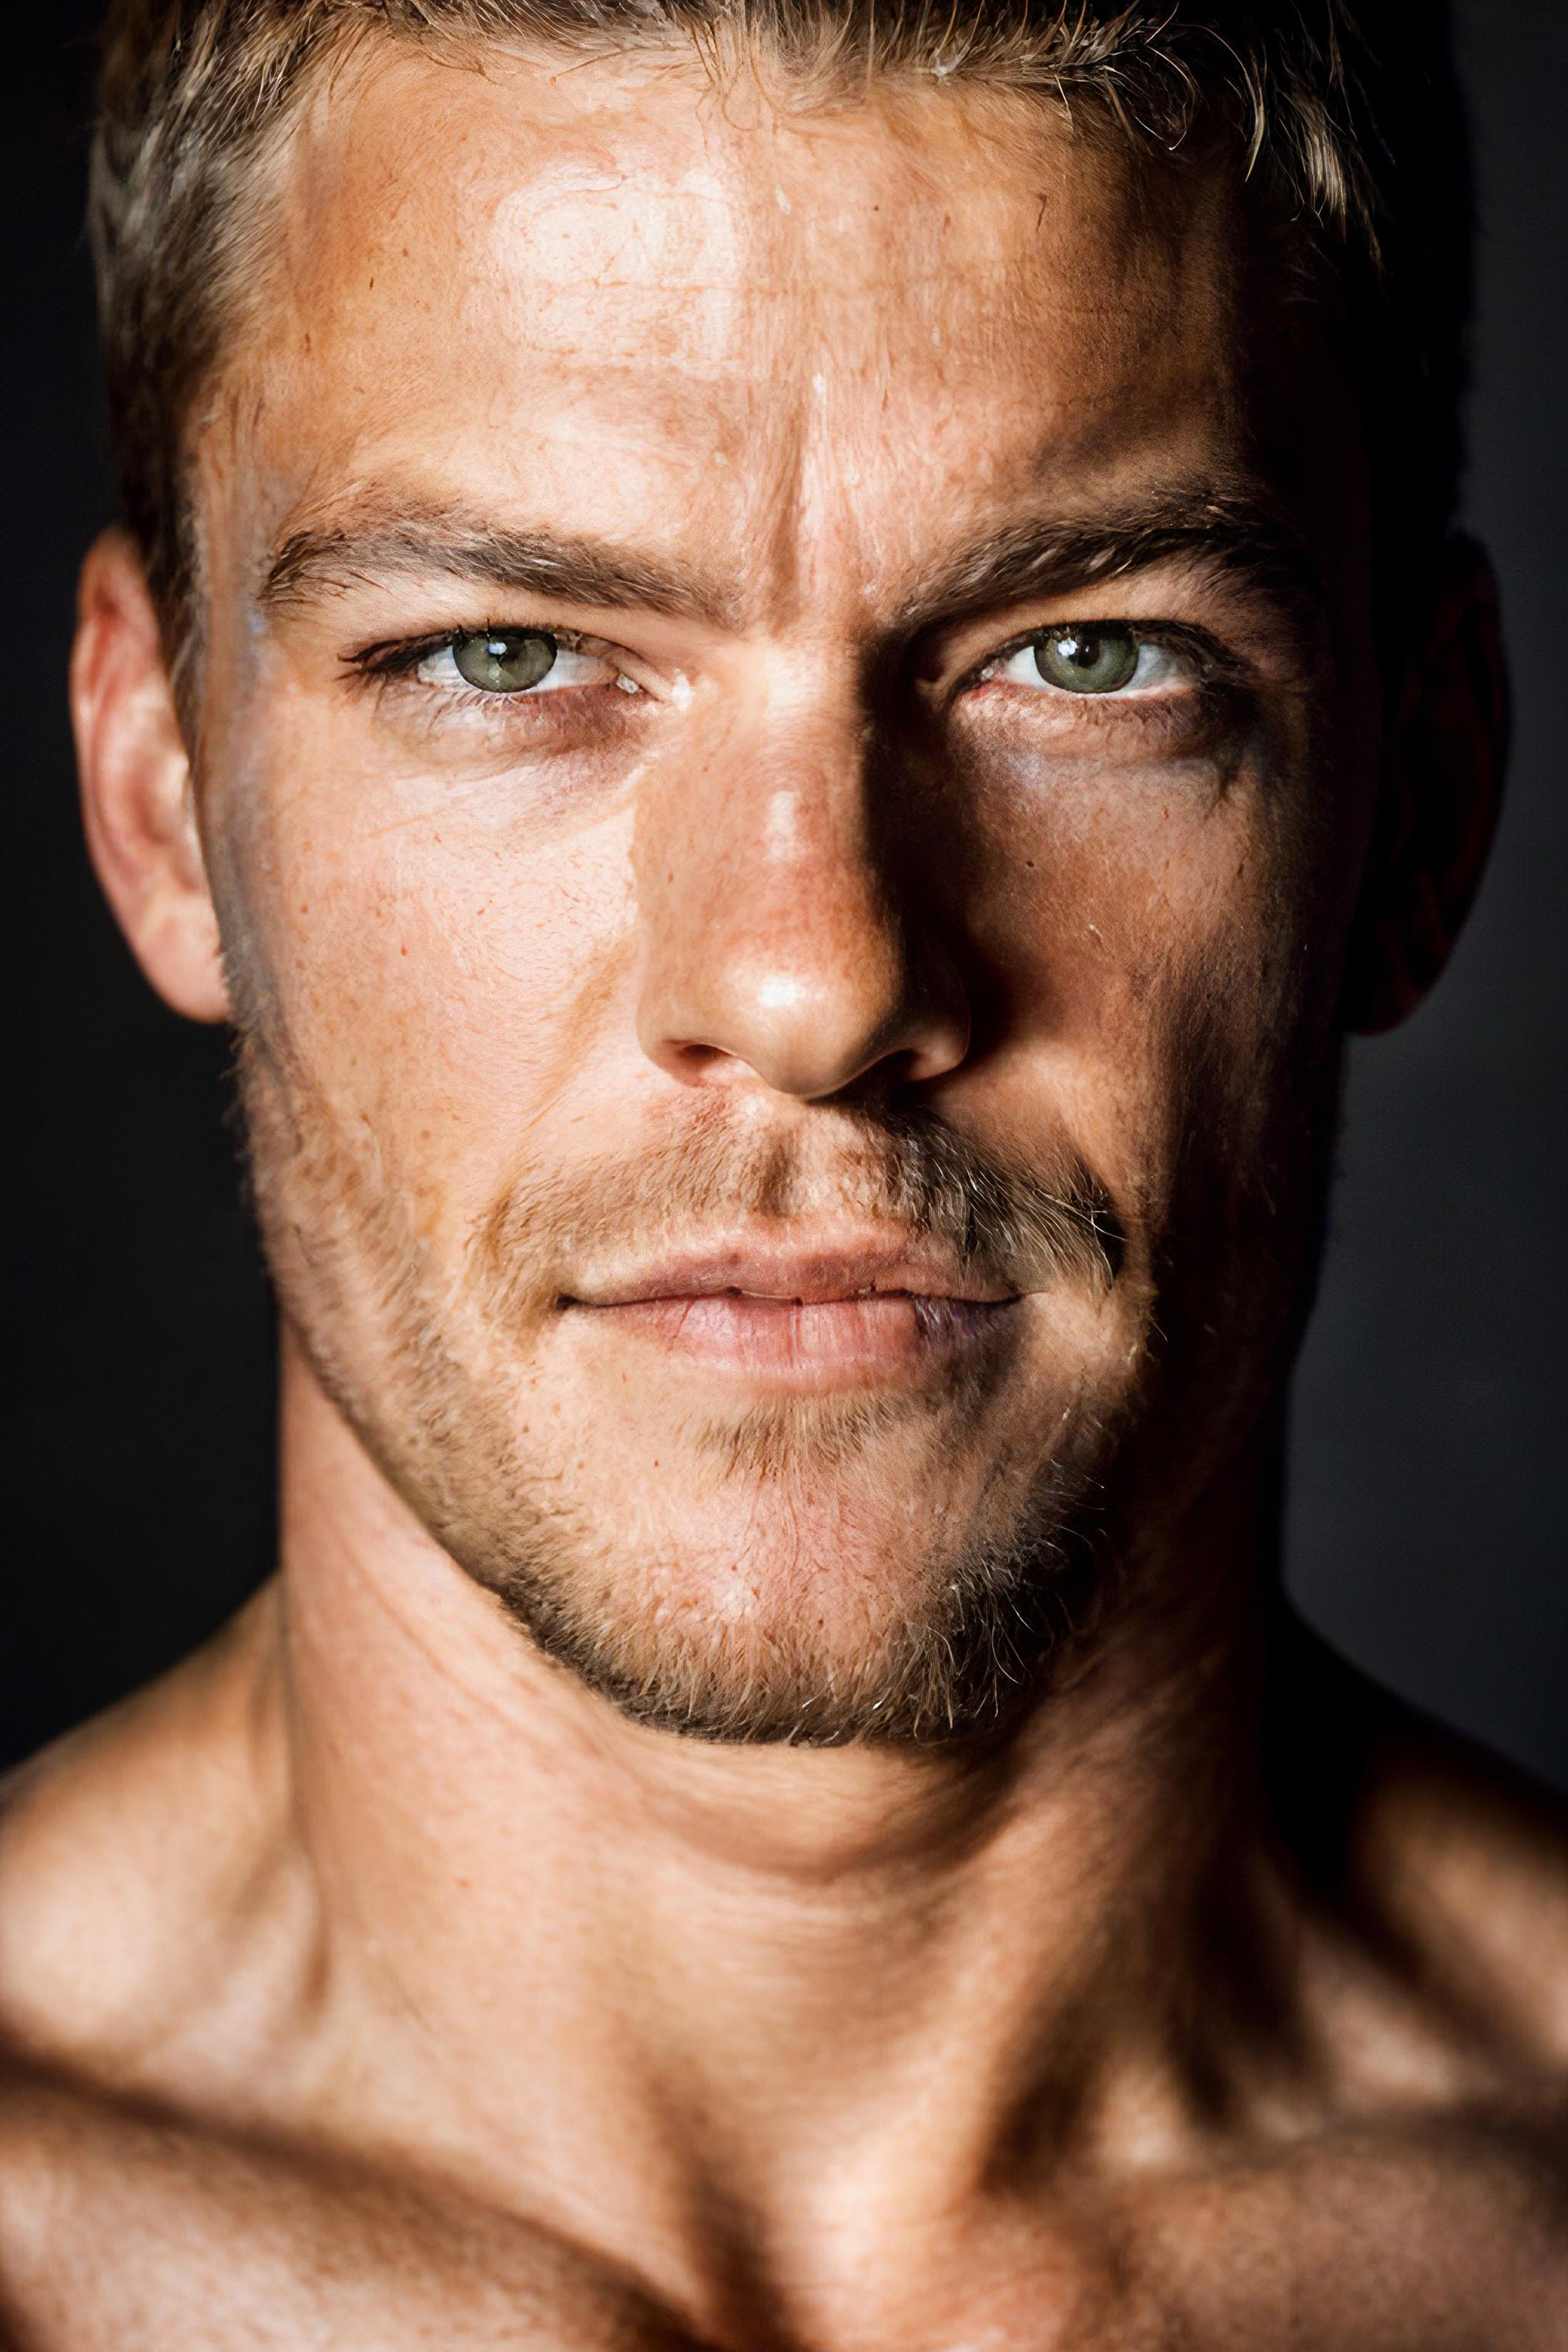 Alan Ritchson image by Zerixworld